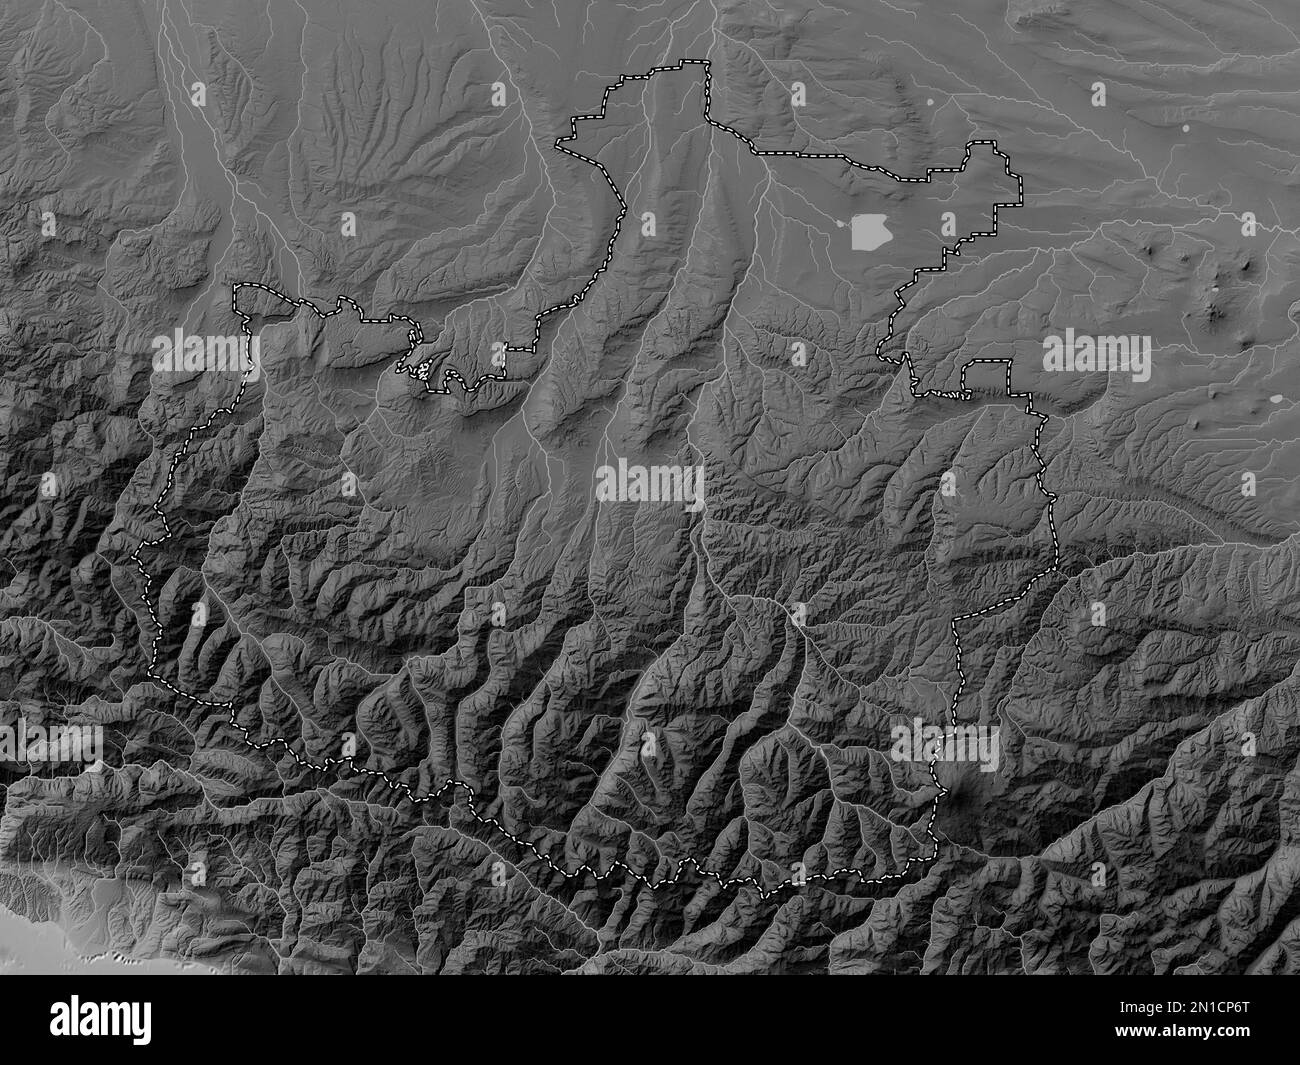 Karachay-Cherkess, republic of Russia. Grayscale elevation map with lakes and rivers Stock Photo